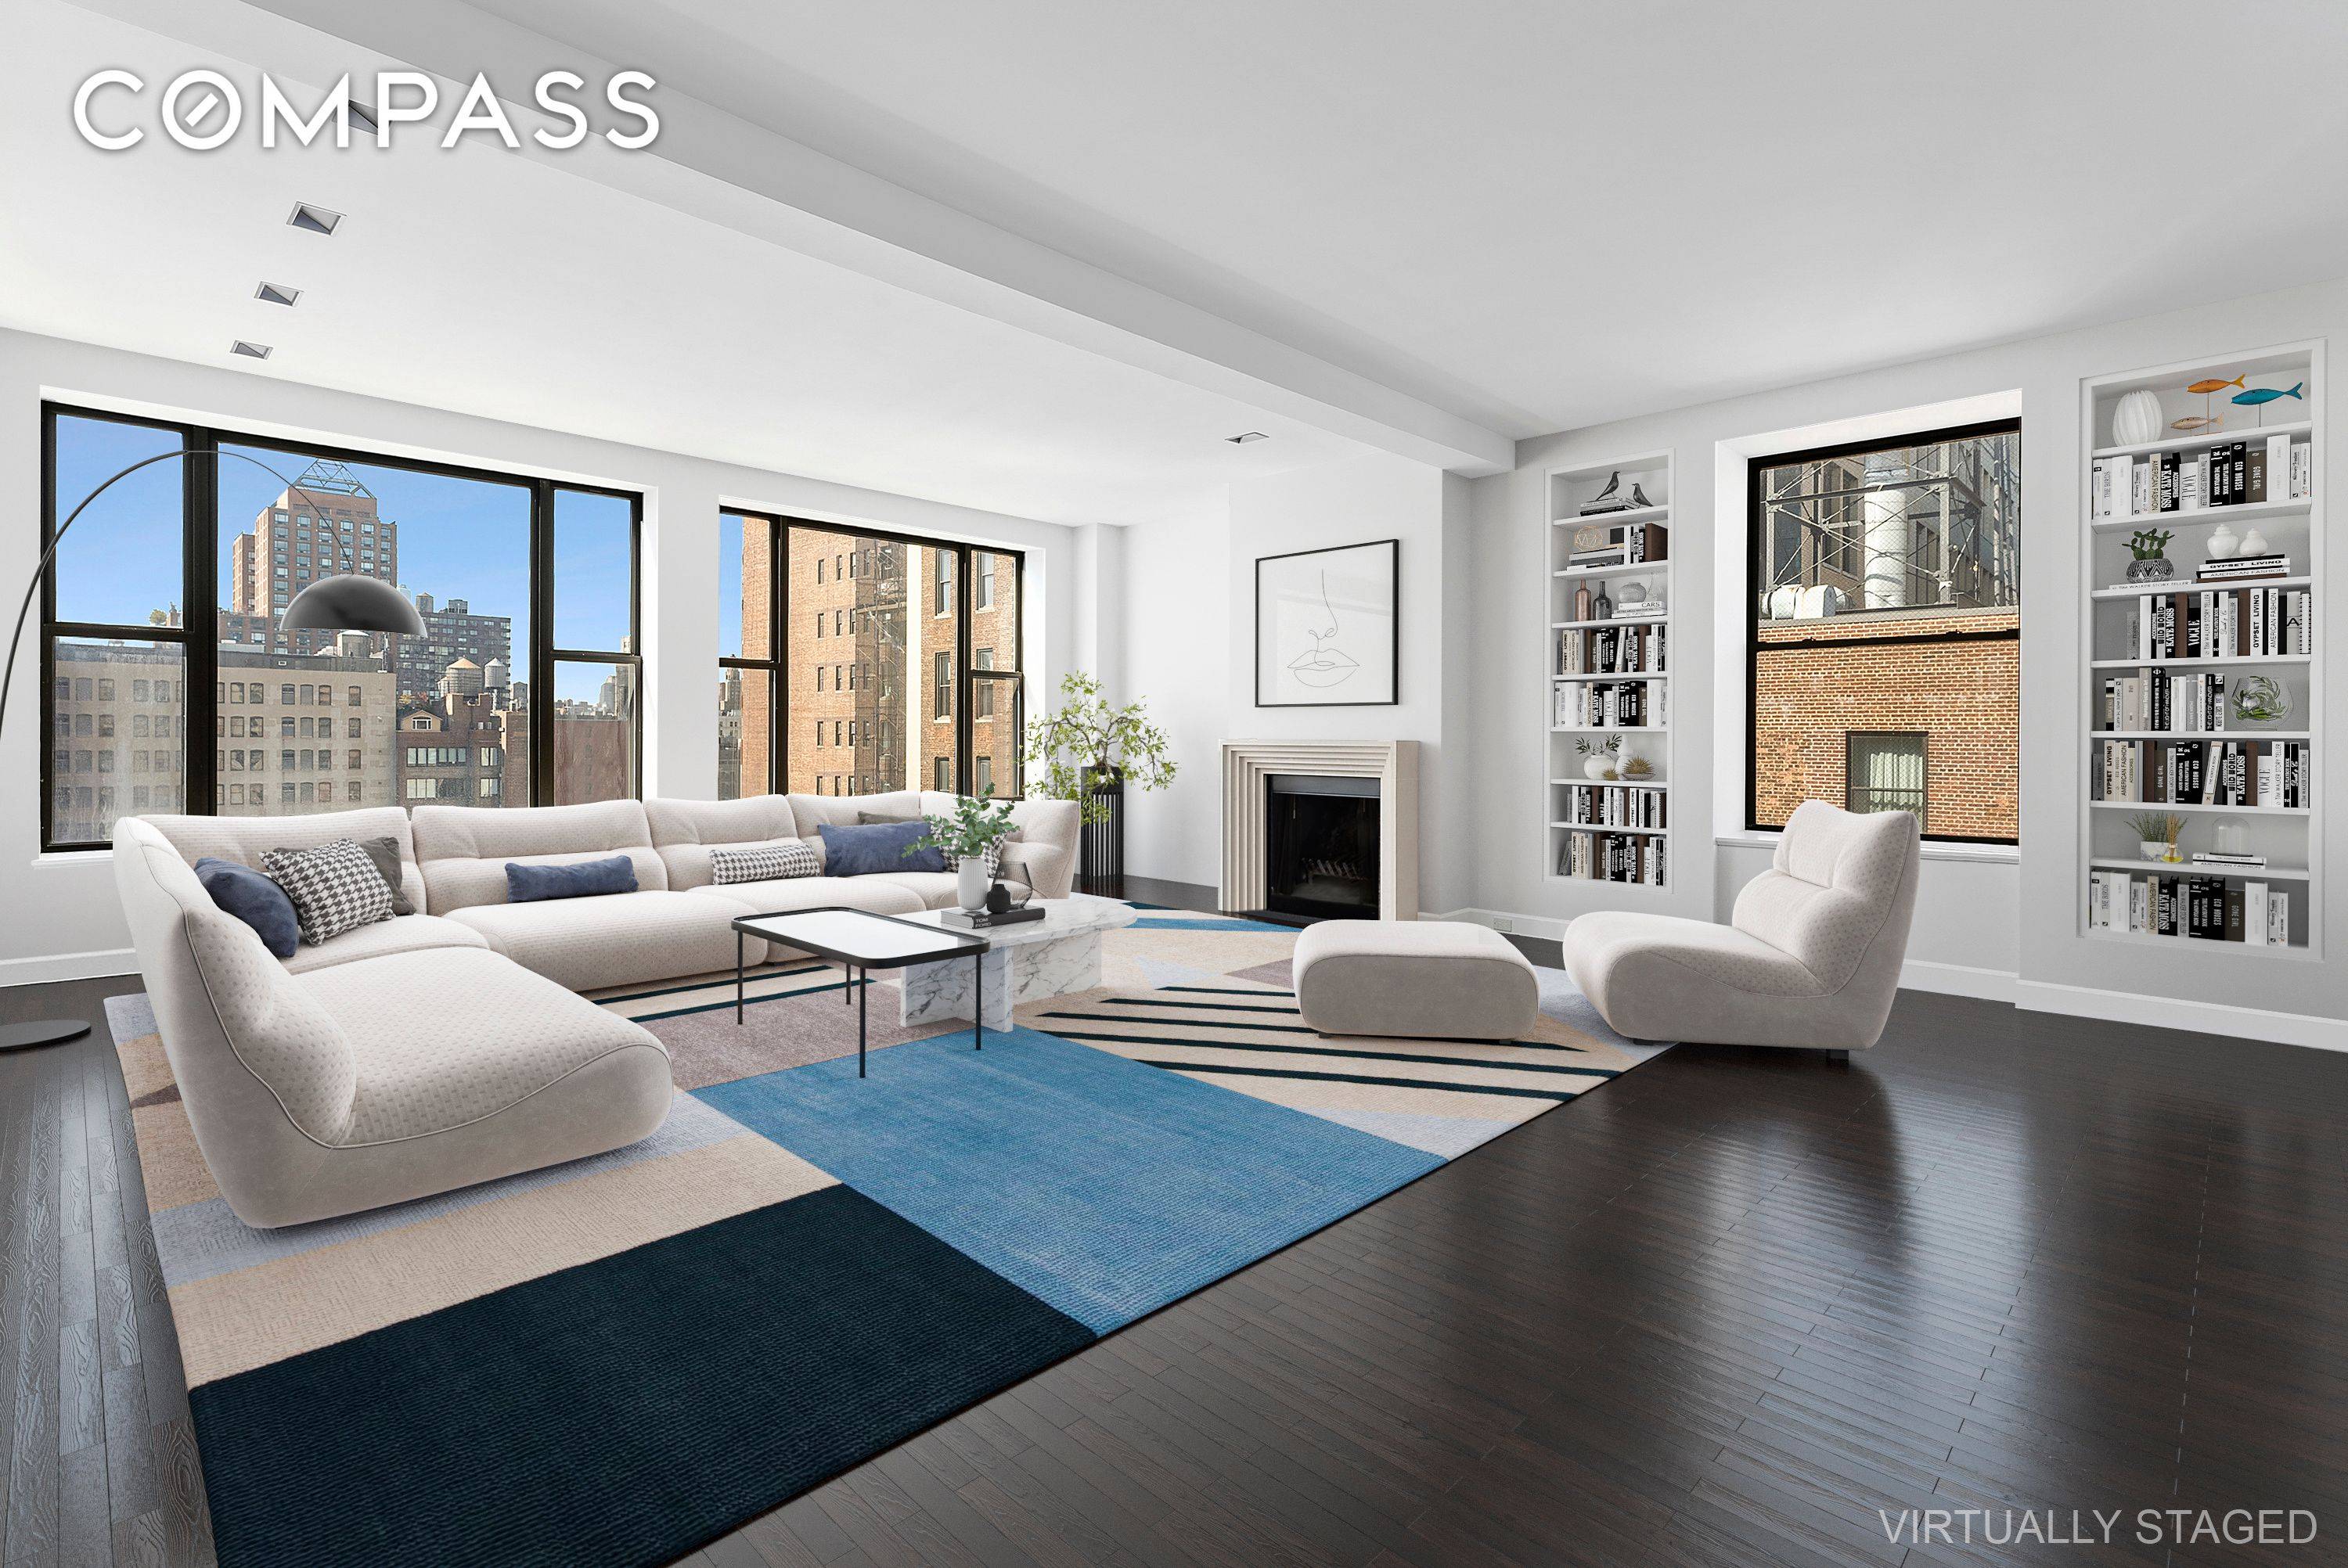 Nothing compares to this expansive open loft with direct southern views just off Gramercy Park and Irving Place.